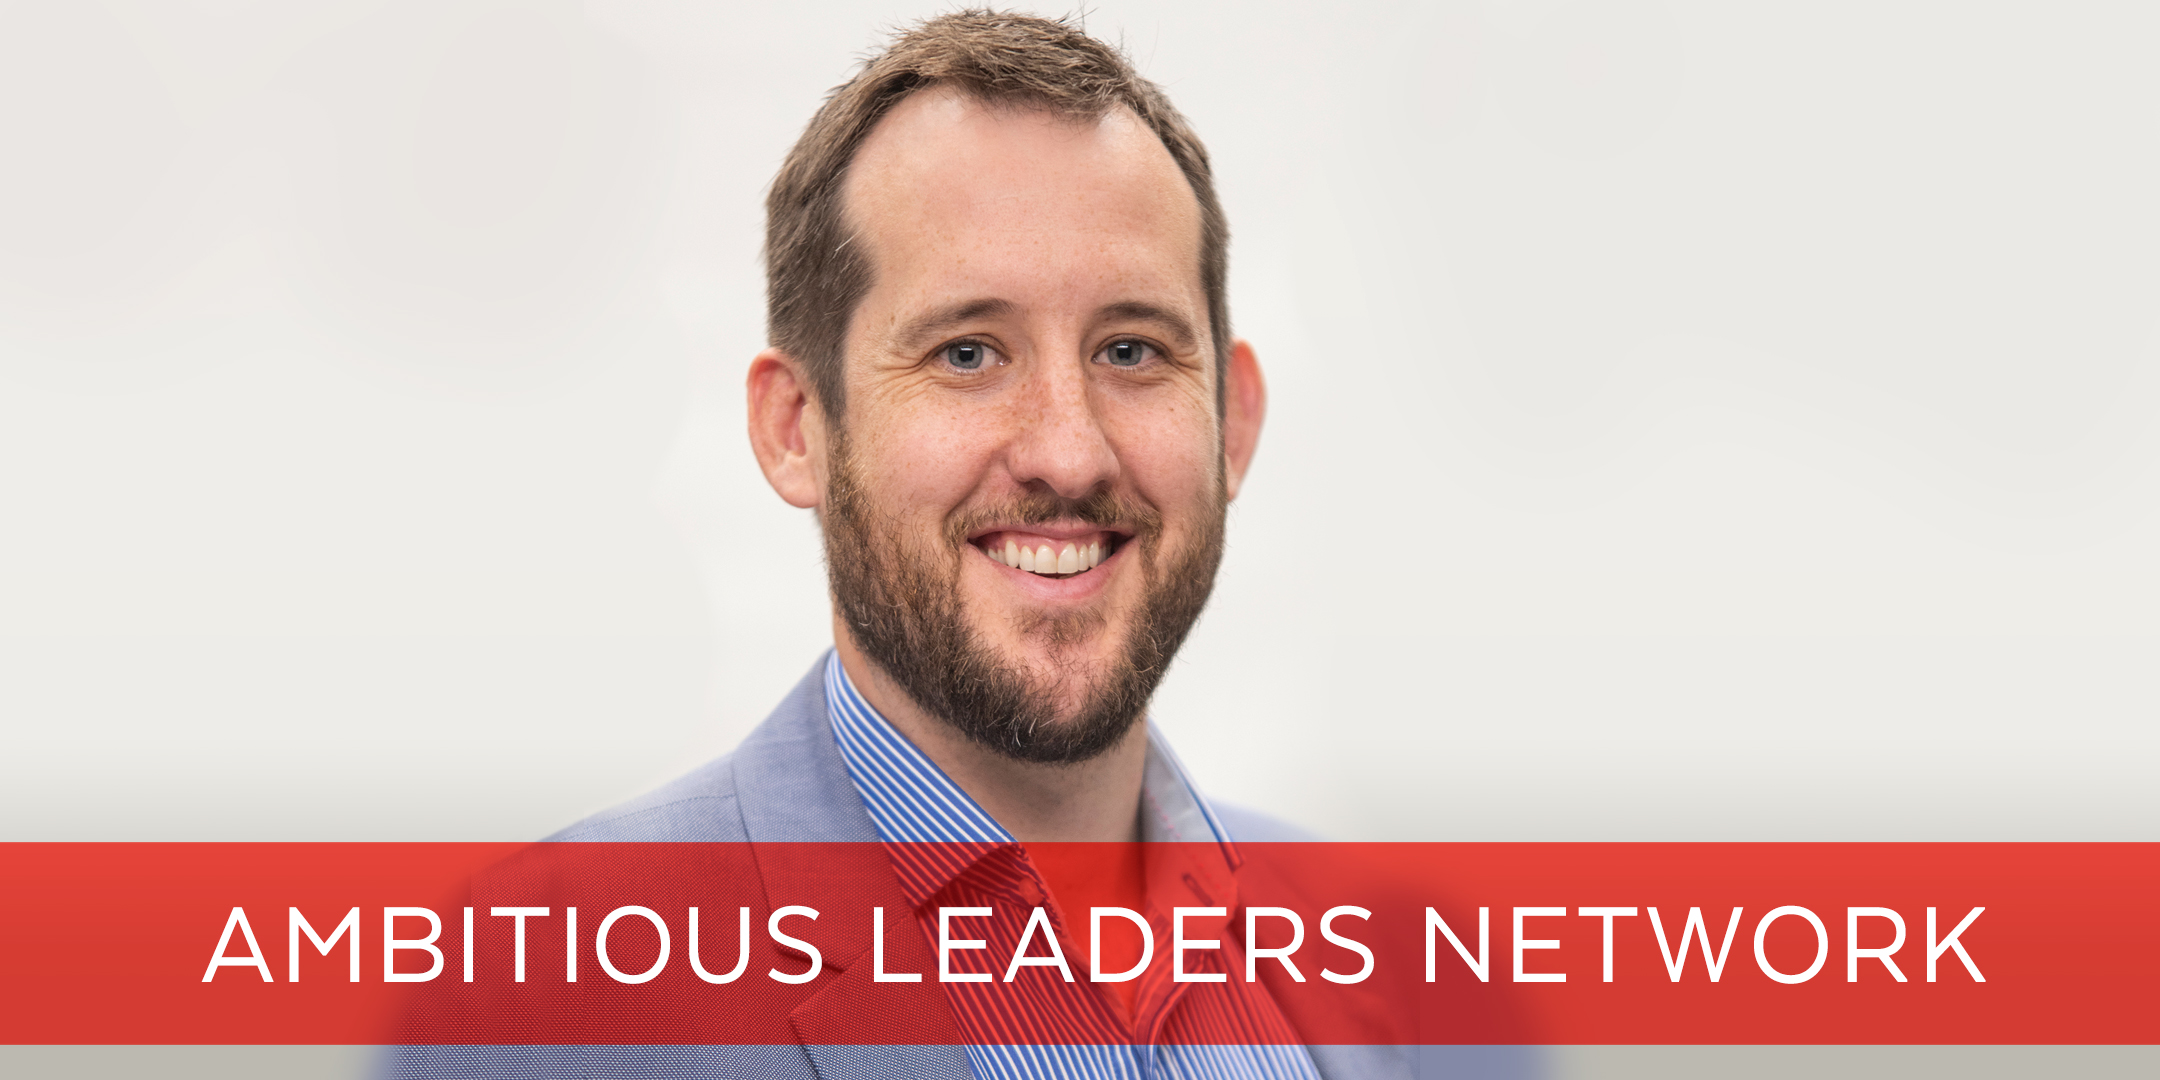 Ambitious Leaders Network - Deane Criddle